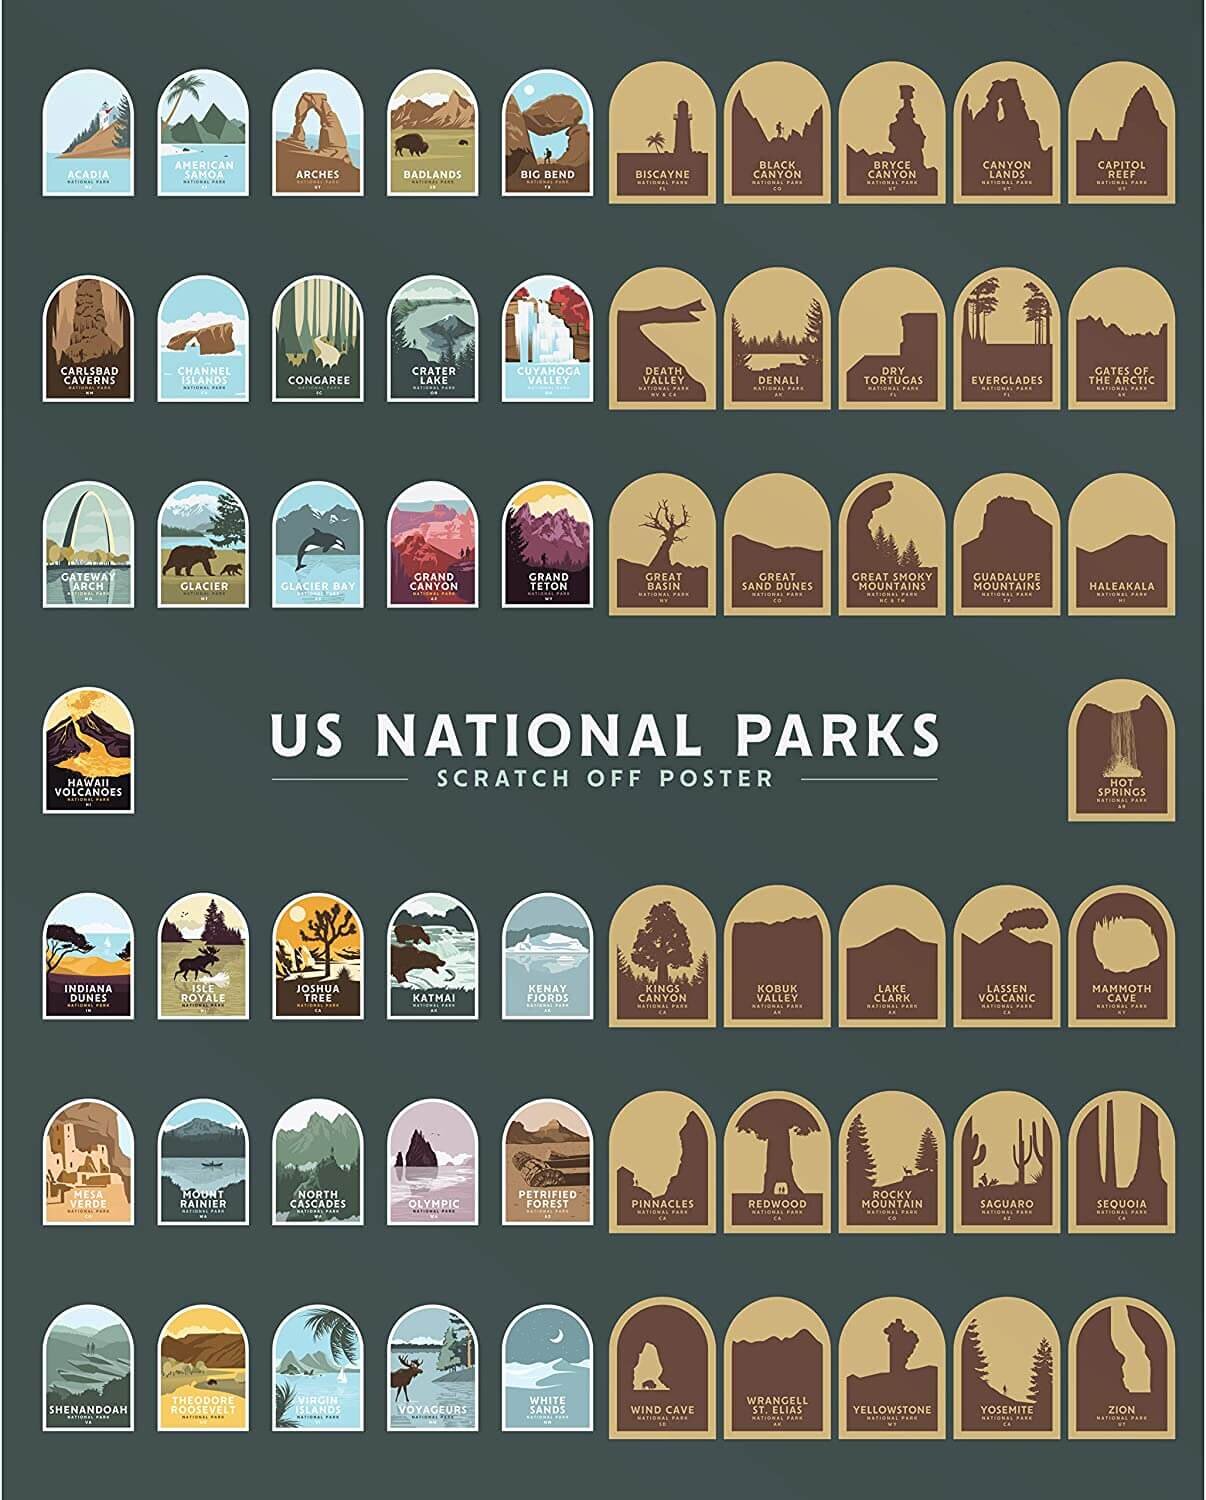 Epic Adventure Maps US National Parks Scratch Off Poster Great as a Gift for Travelers 24 x 17 Inches Blue National Park Posters Reveals Pine Shaped Nature Photographs 